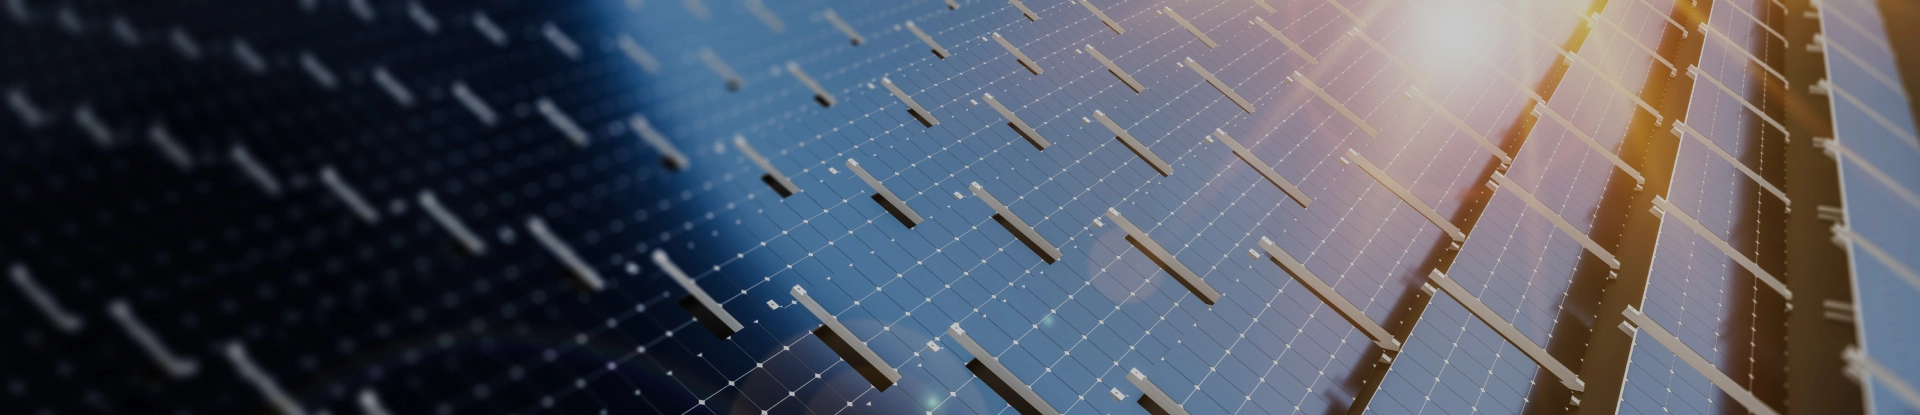 photovoltaic panels for sustainable energy